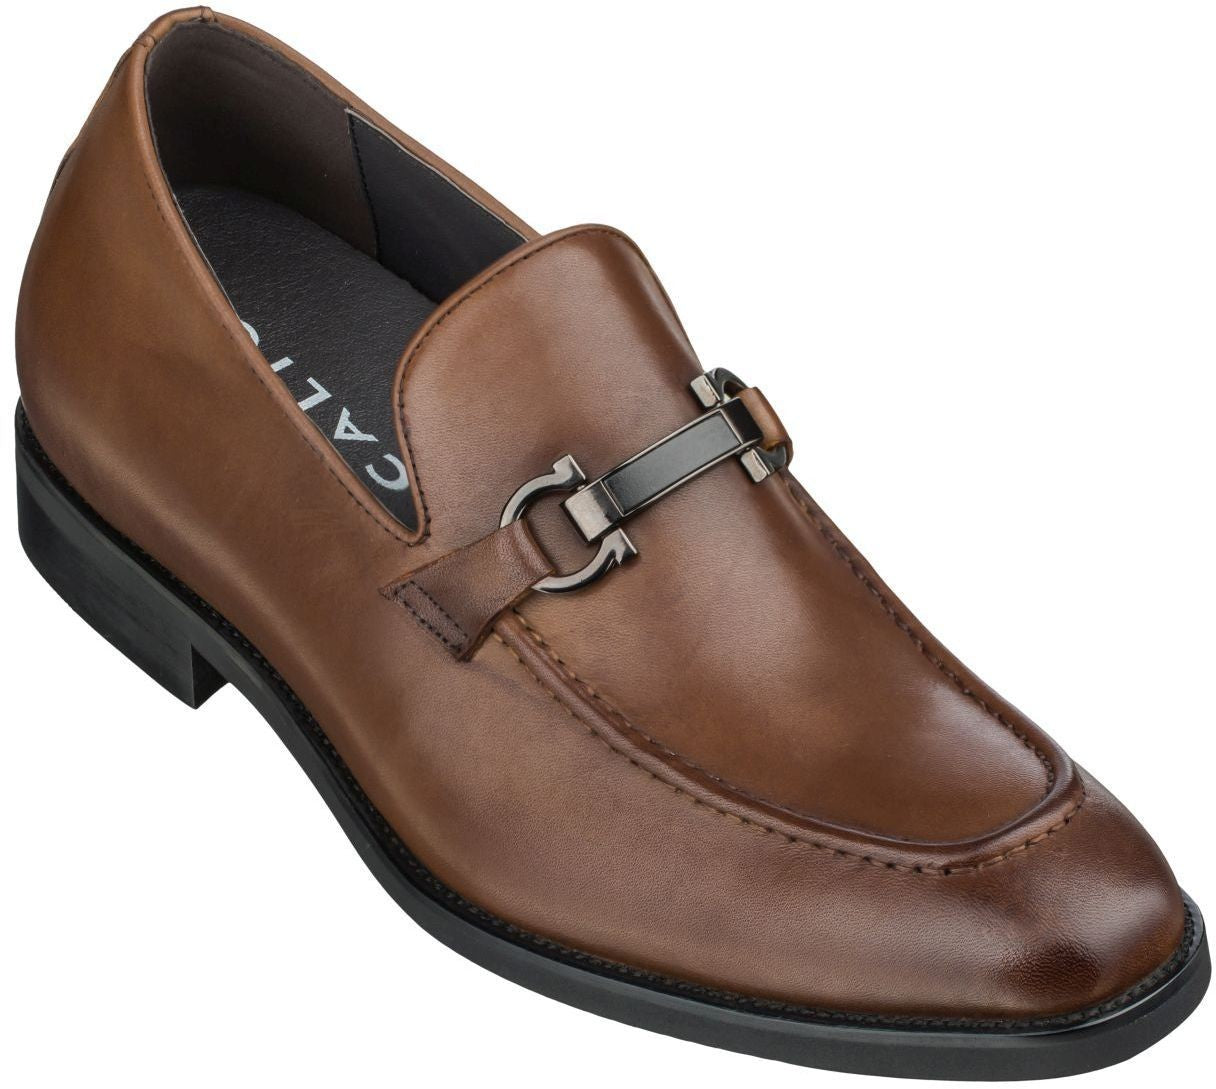 Elevator shoes height increase CALTO - S2111 - 3.0 Inches Taller (Dark Brown)